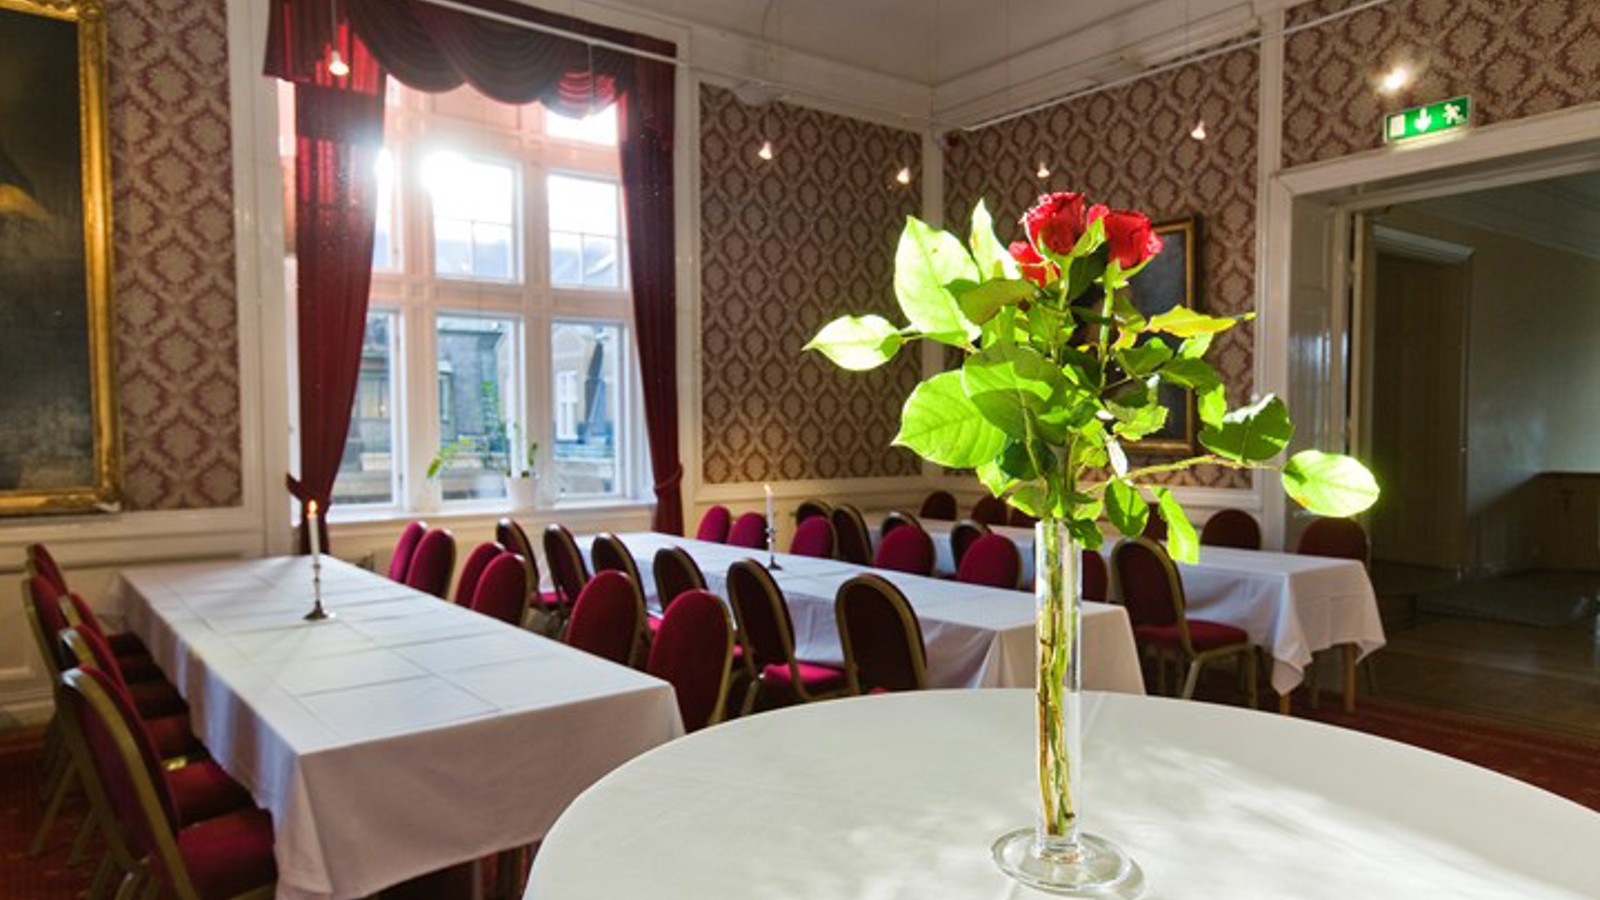 Room with set tables, white tablecloths and vase of roses